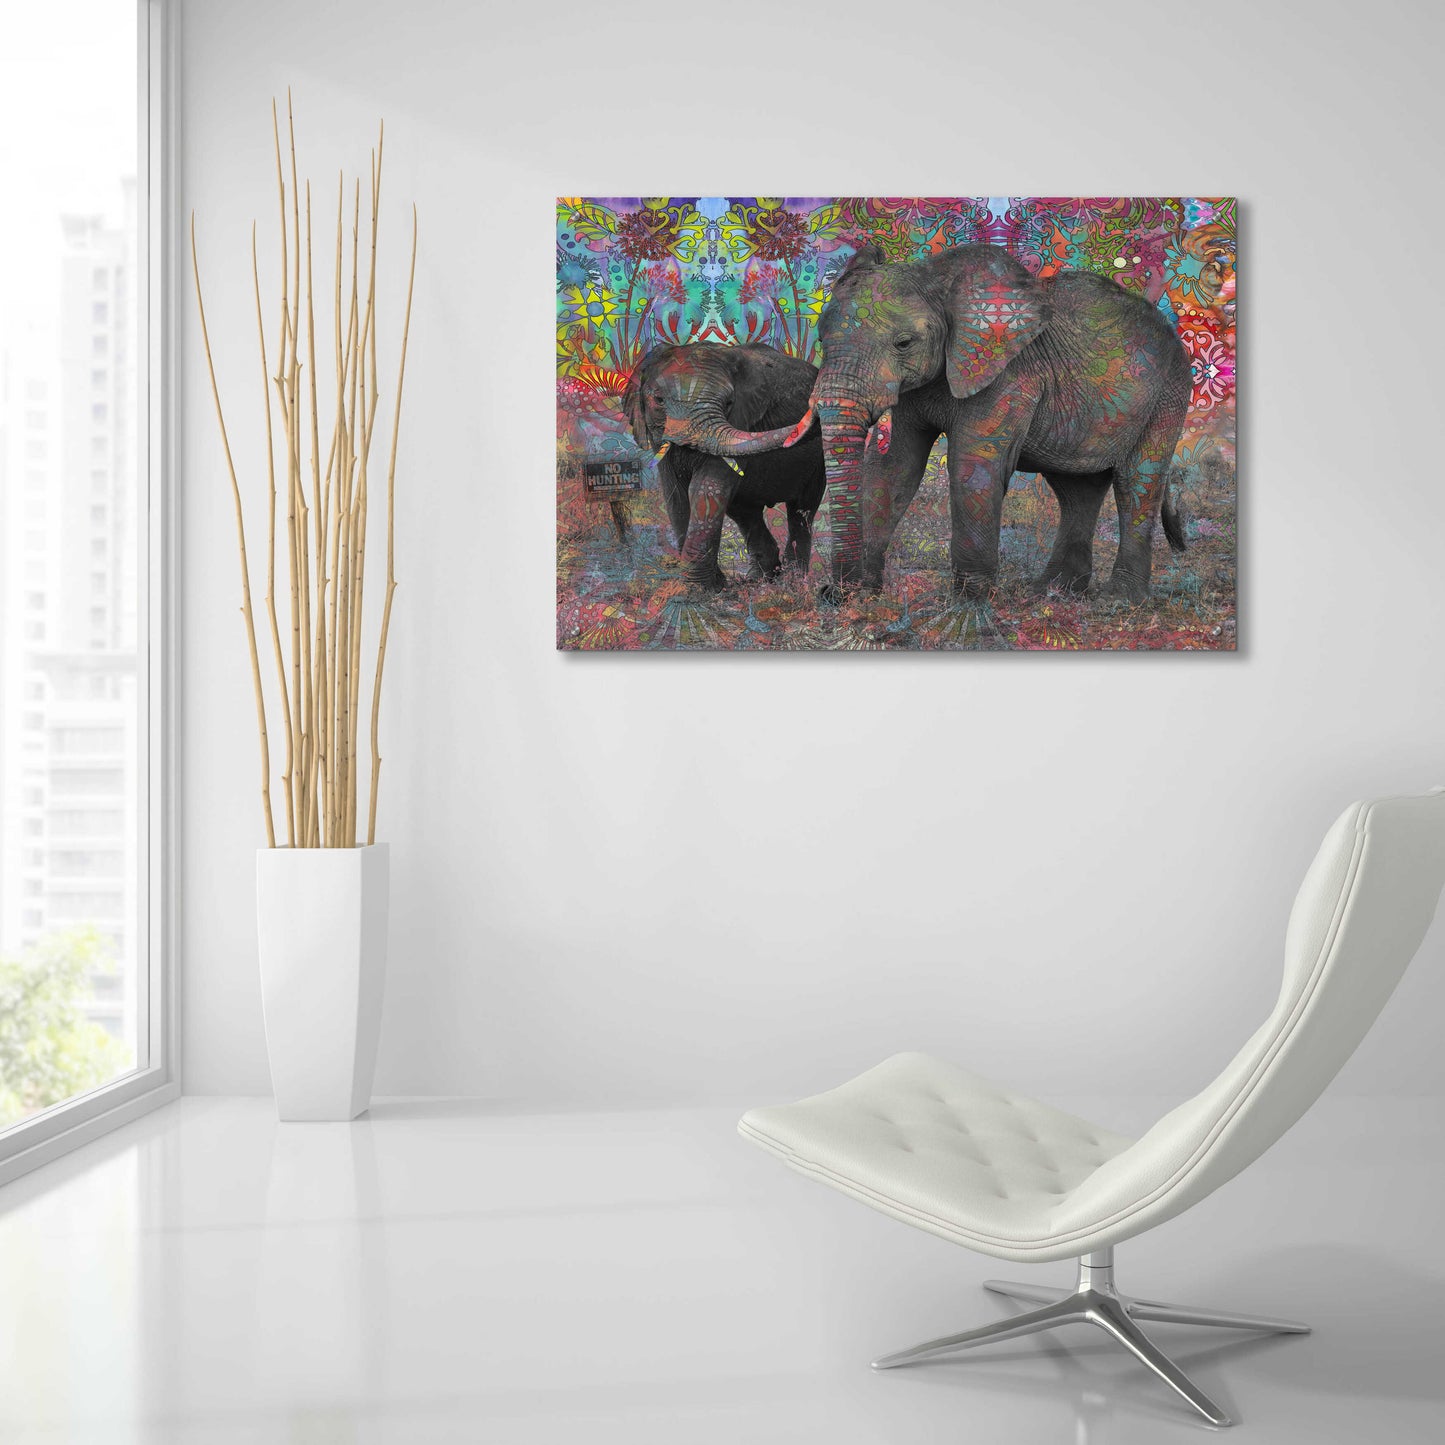 Epic Art 'No Hunting' by Dean Russo, Acrylic Glass Wall Art,36x24